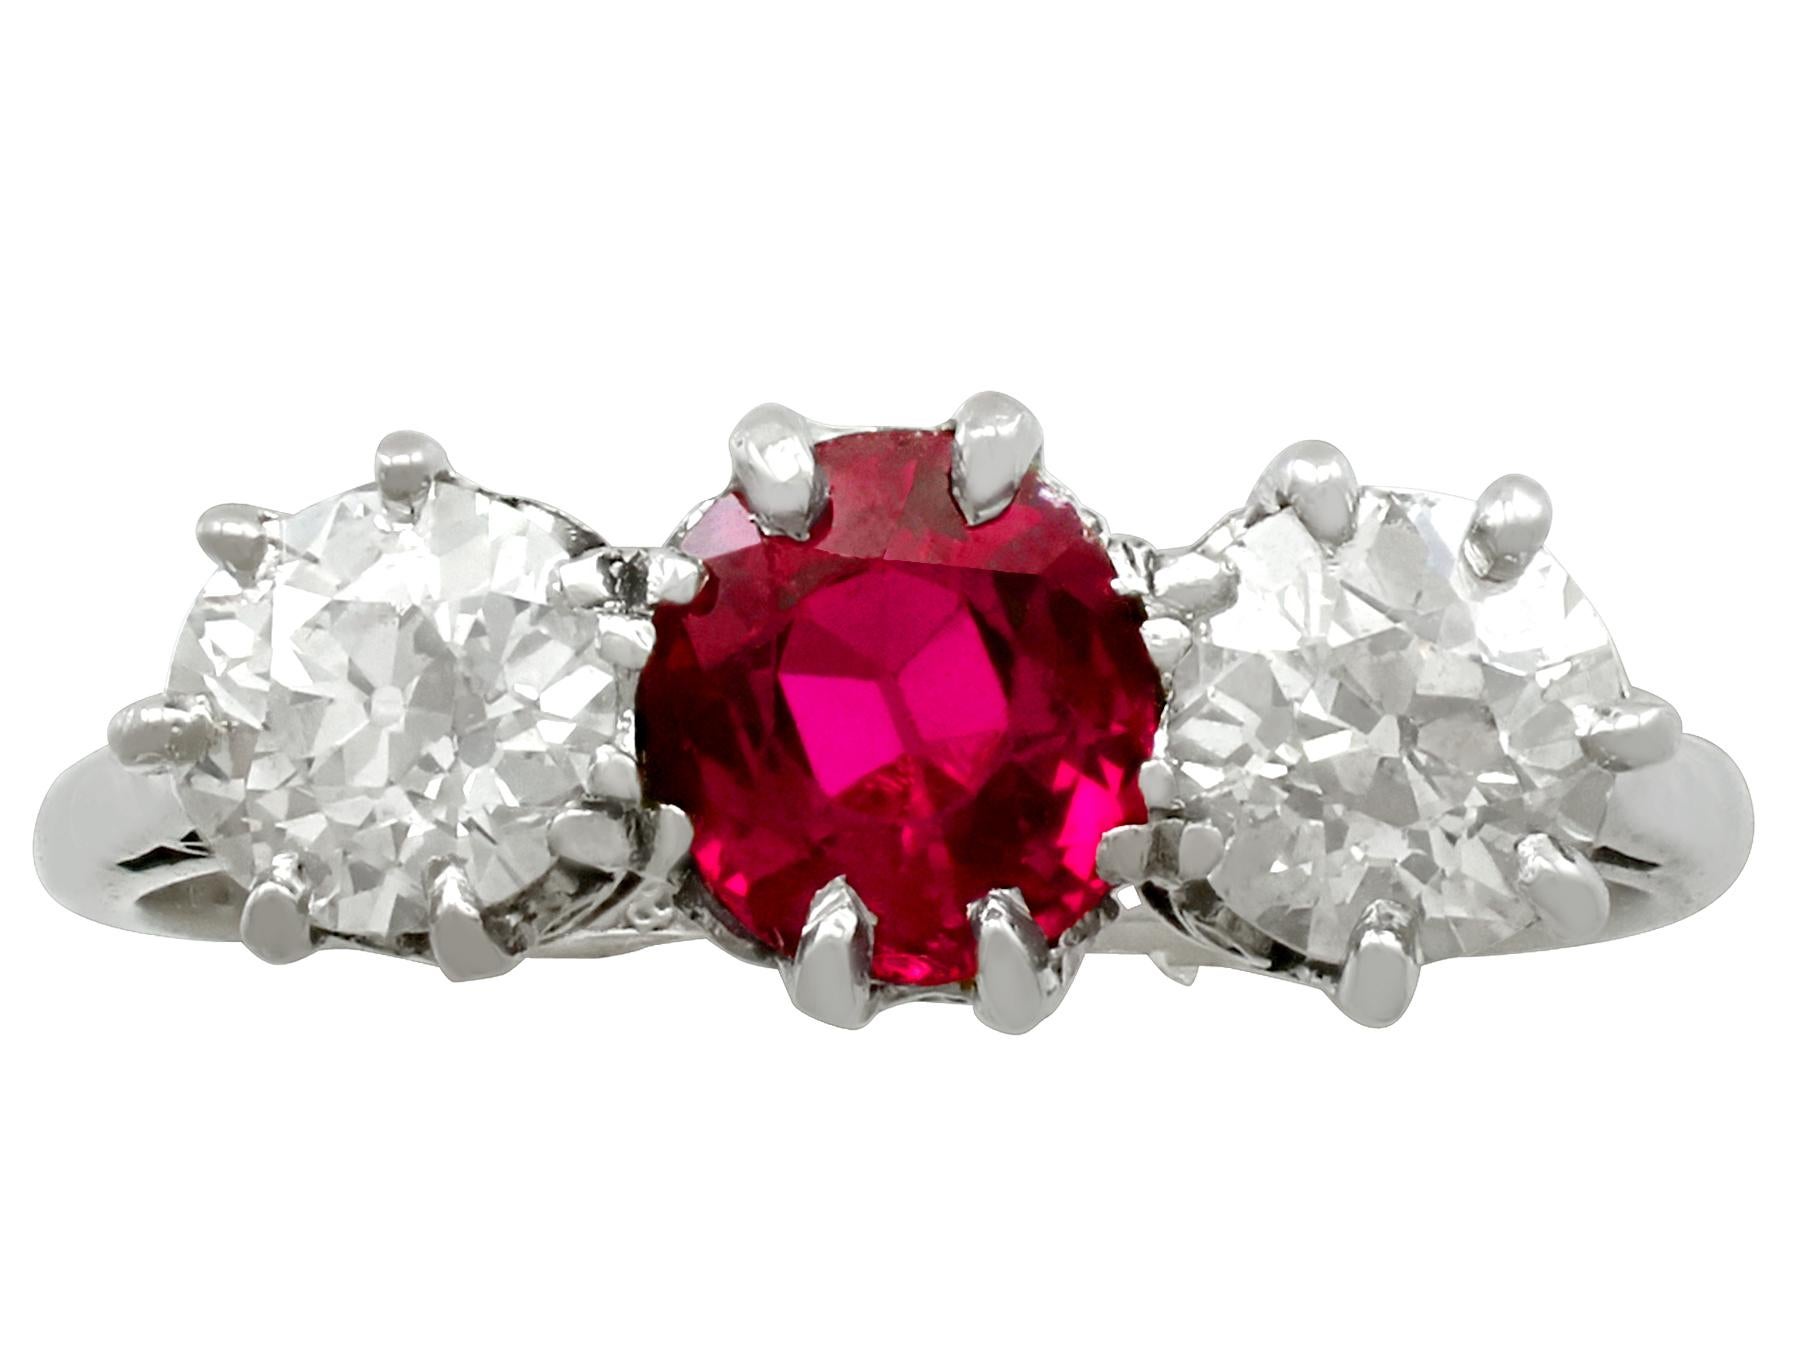 An impressive 1.23 carat ruby and 1.25 carat diamond, 18 karat white gold and platinum set three stone ring; part of our diverse vintage jewelry and estate jewelry collections.

This fine and impressive ruby and diamond three stone ring has been